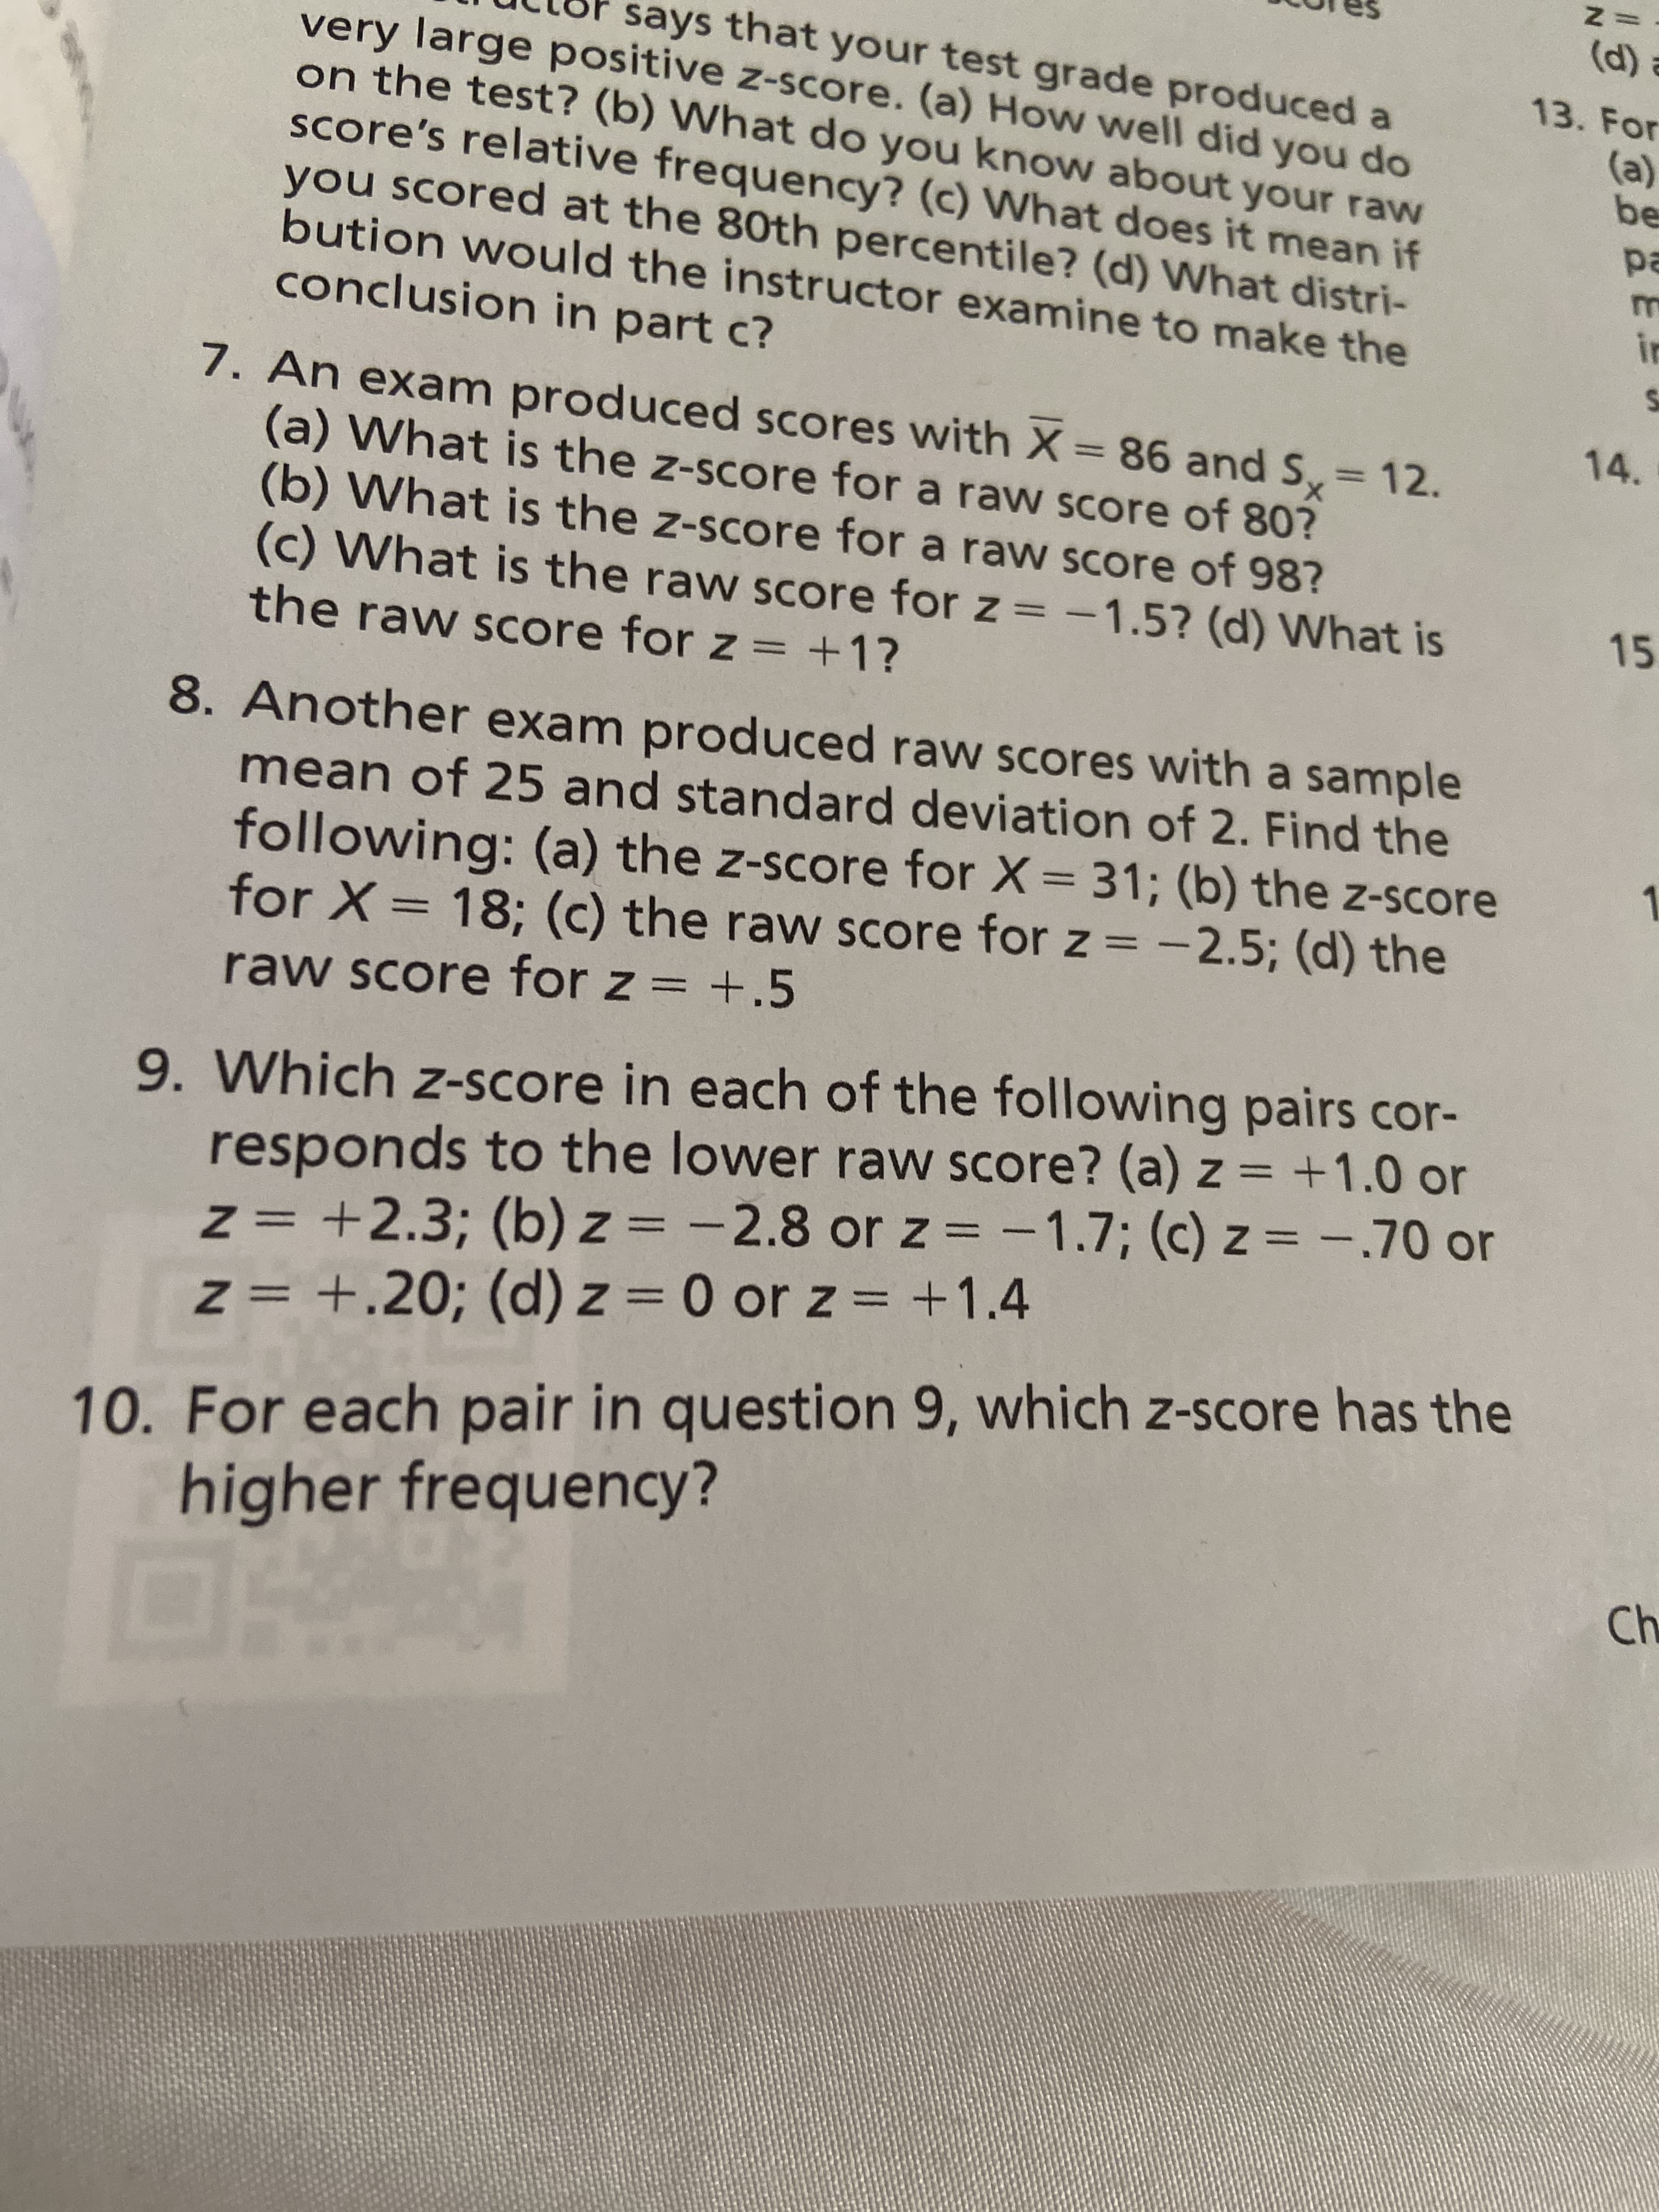 10. For each pair in question 9, which z-score has the
higher frequency?
